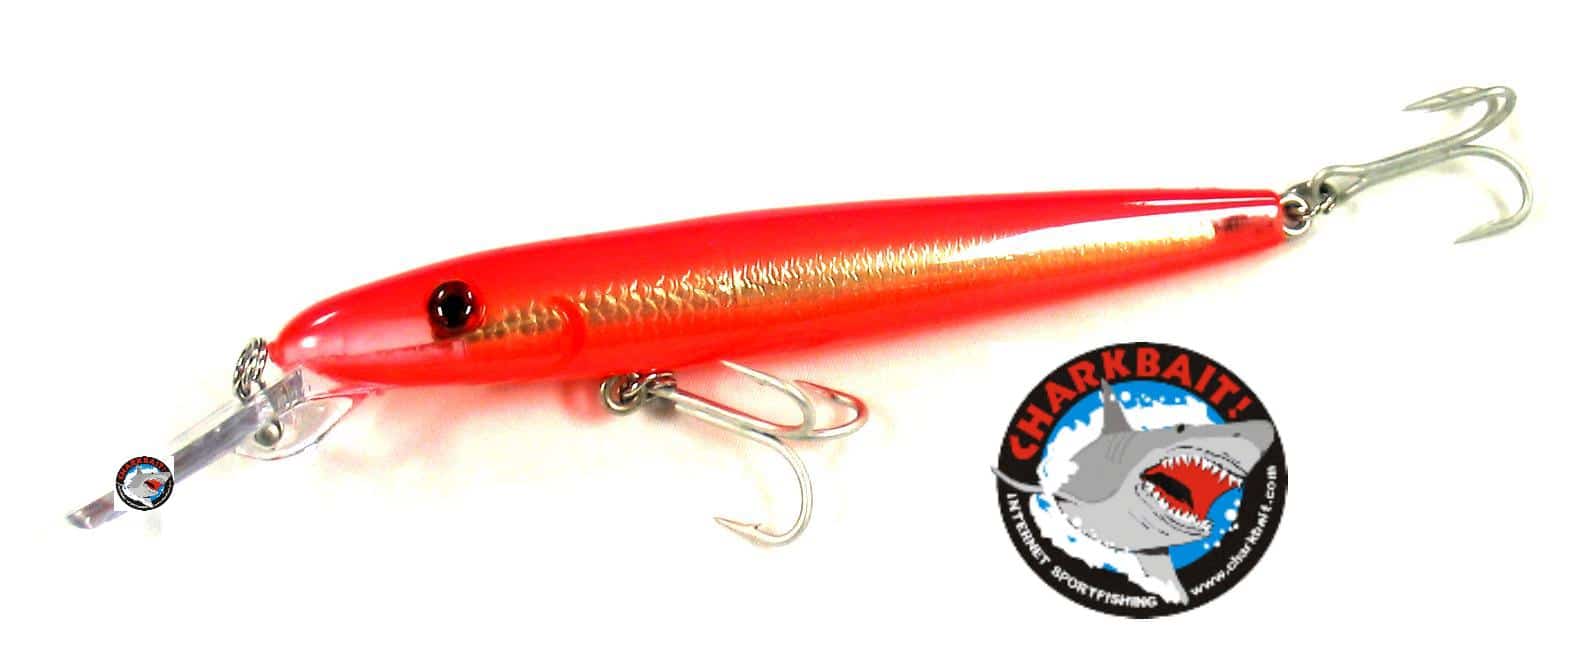 HowTo Rig ILand Trolling Lure For Wahoo & Other Big Game